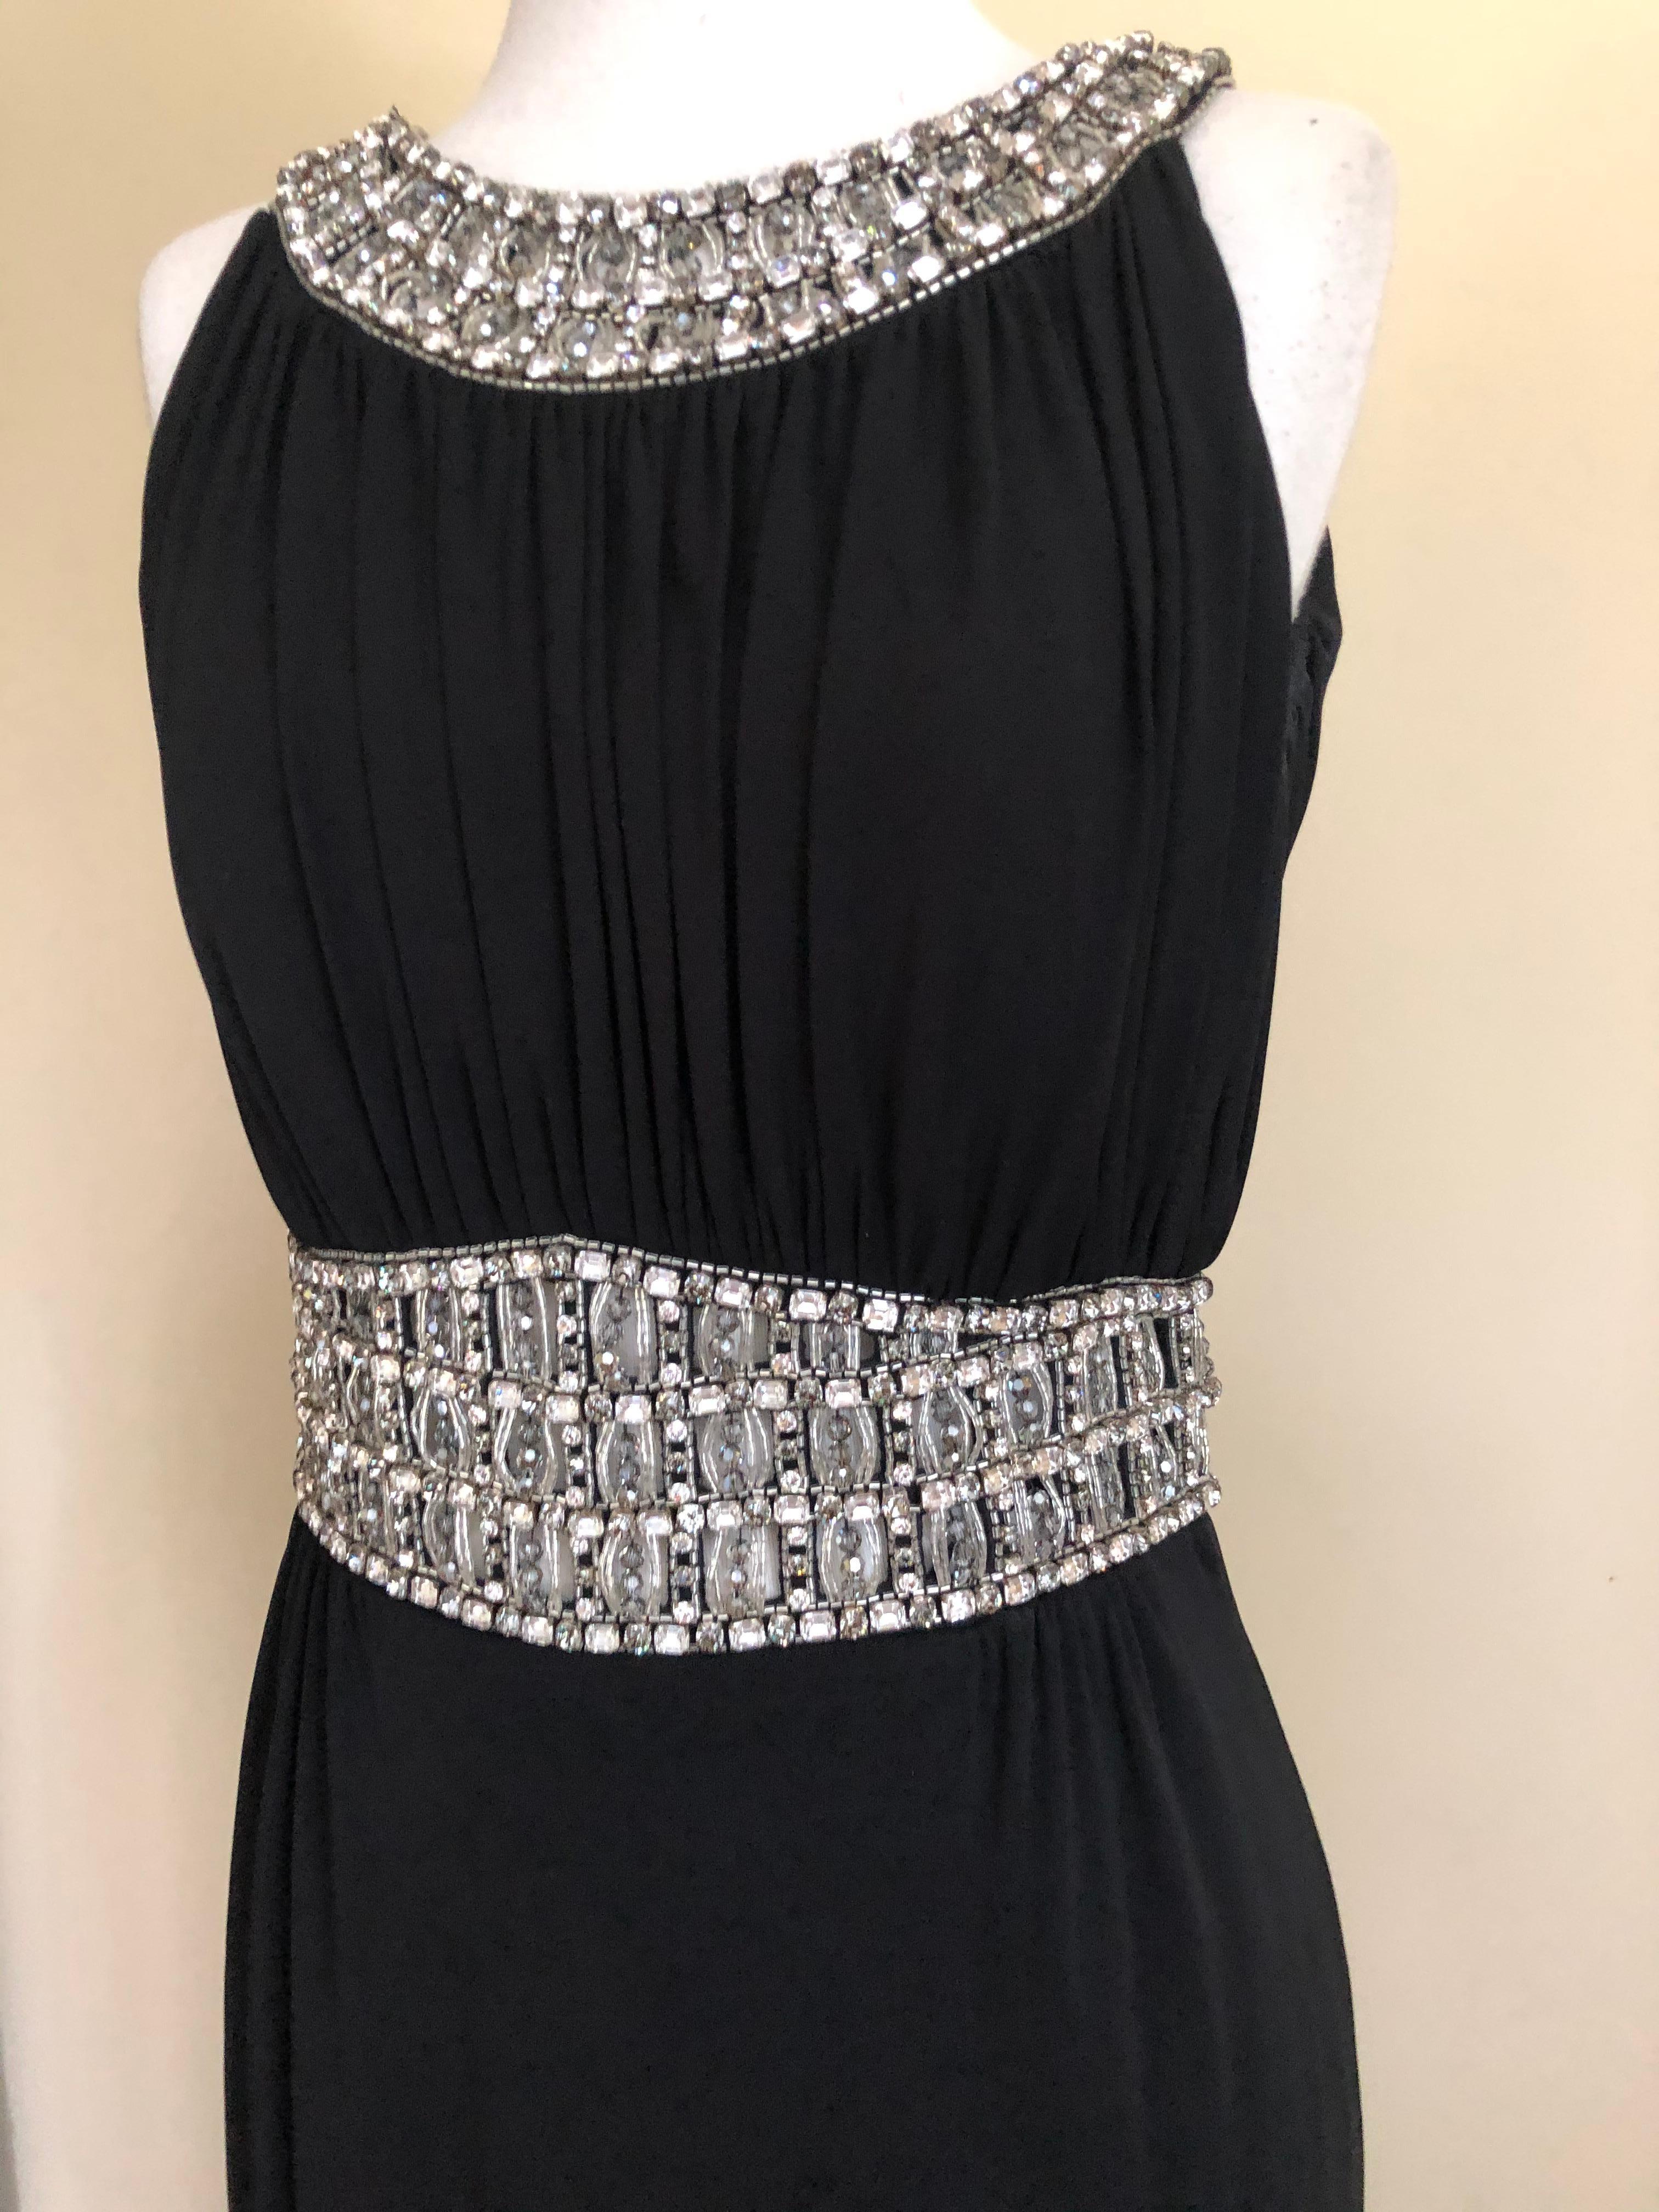 Azzaro Pleated Black Vintage Evening Dress with Jeweled Collar and Belt For Sale 4